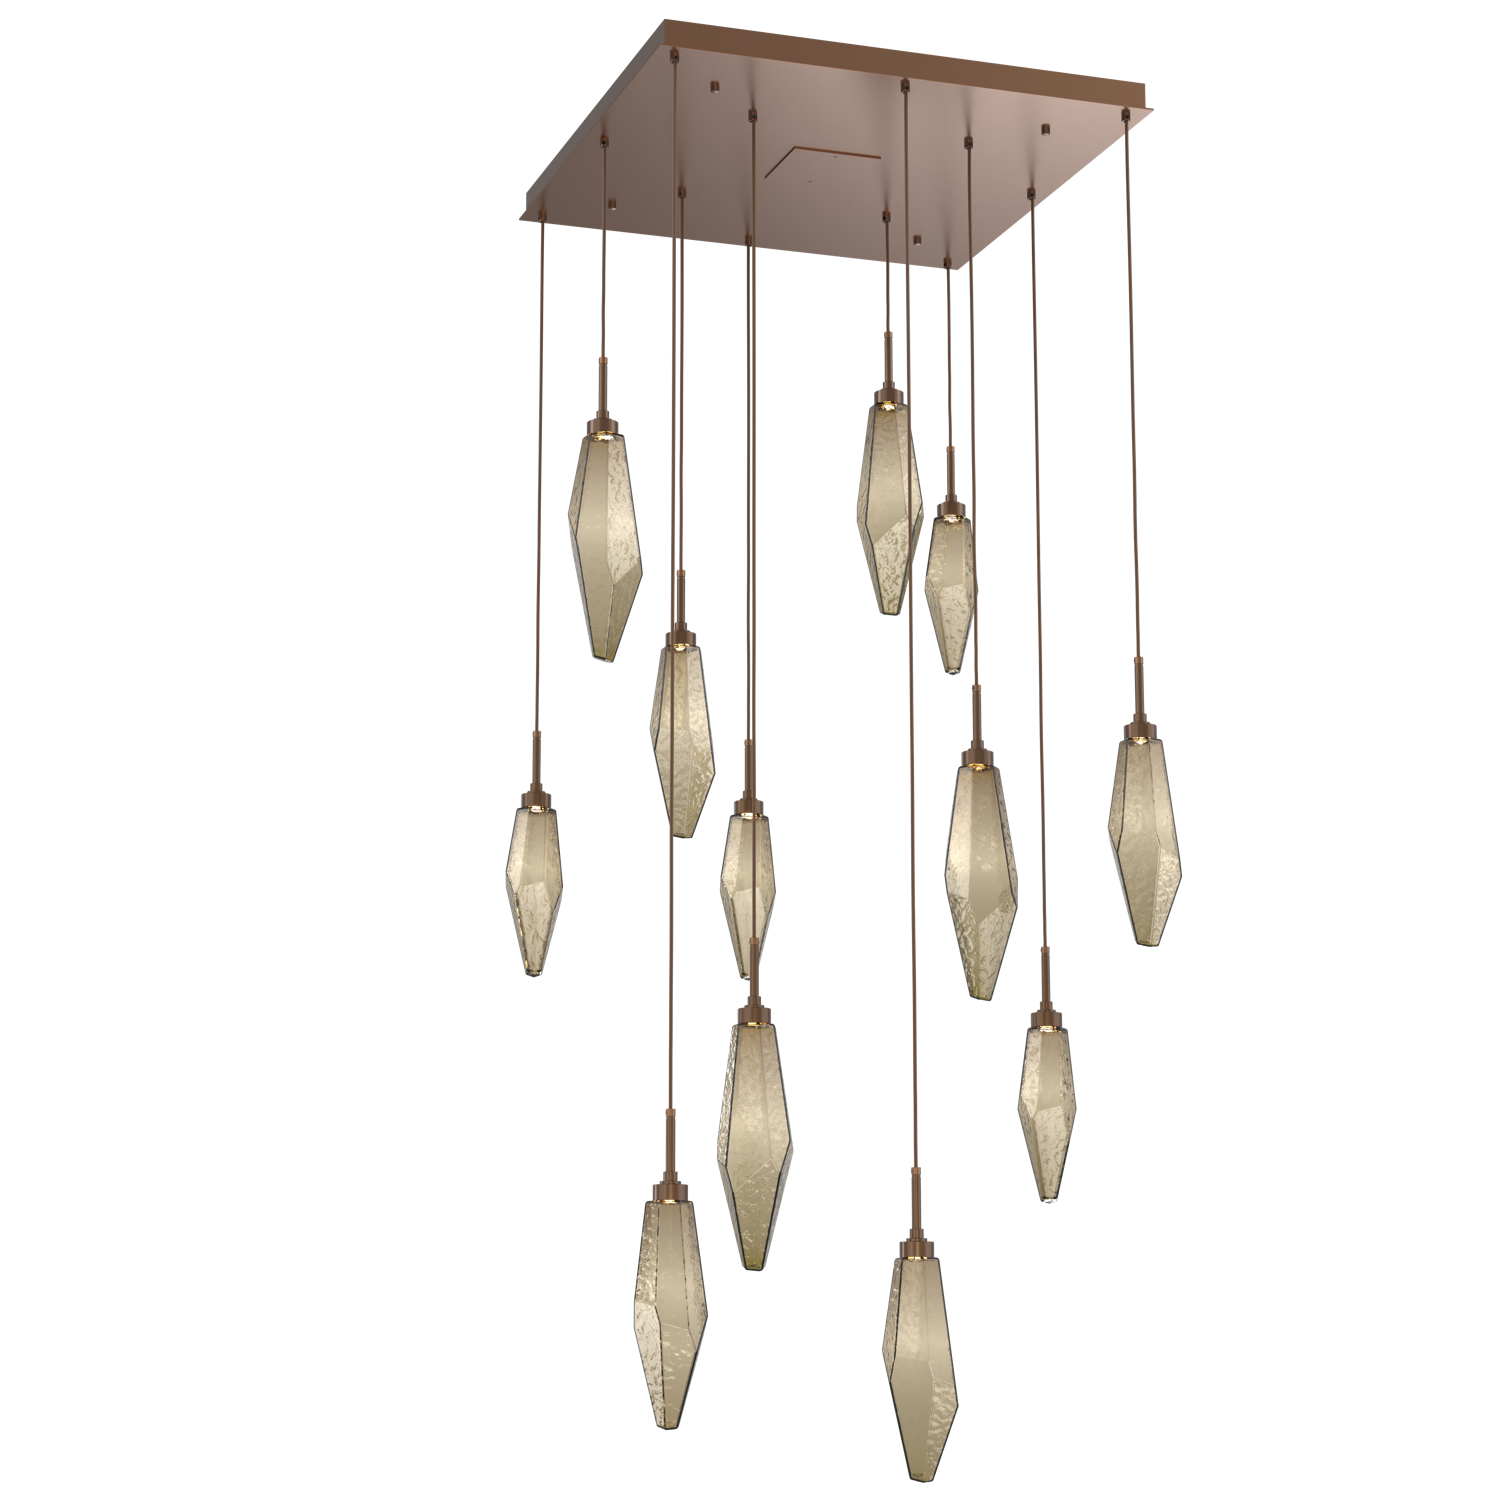 CHB0050-12-BB-CB-Hammerton-Studio-Rock-Crystal-12-light-square-pendant-chandelier-with-burnished-bronze-finish-and-chilled-bronze-blown-glass-shades-and-LED-lamping